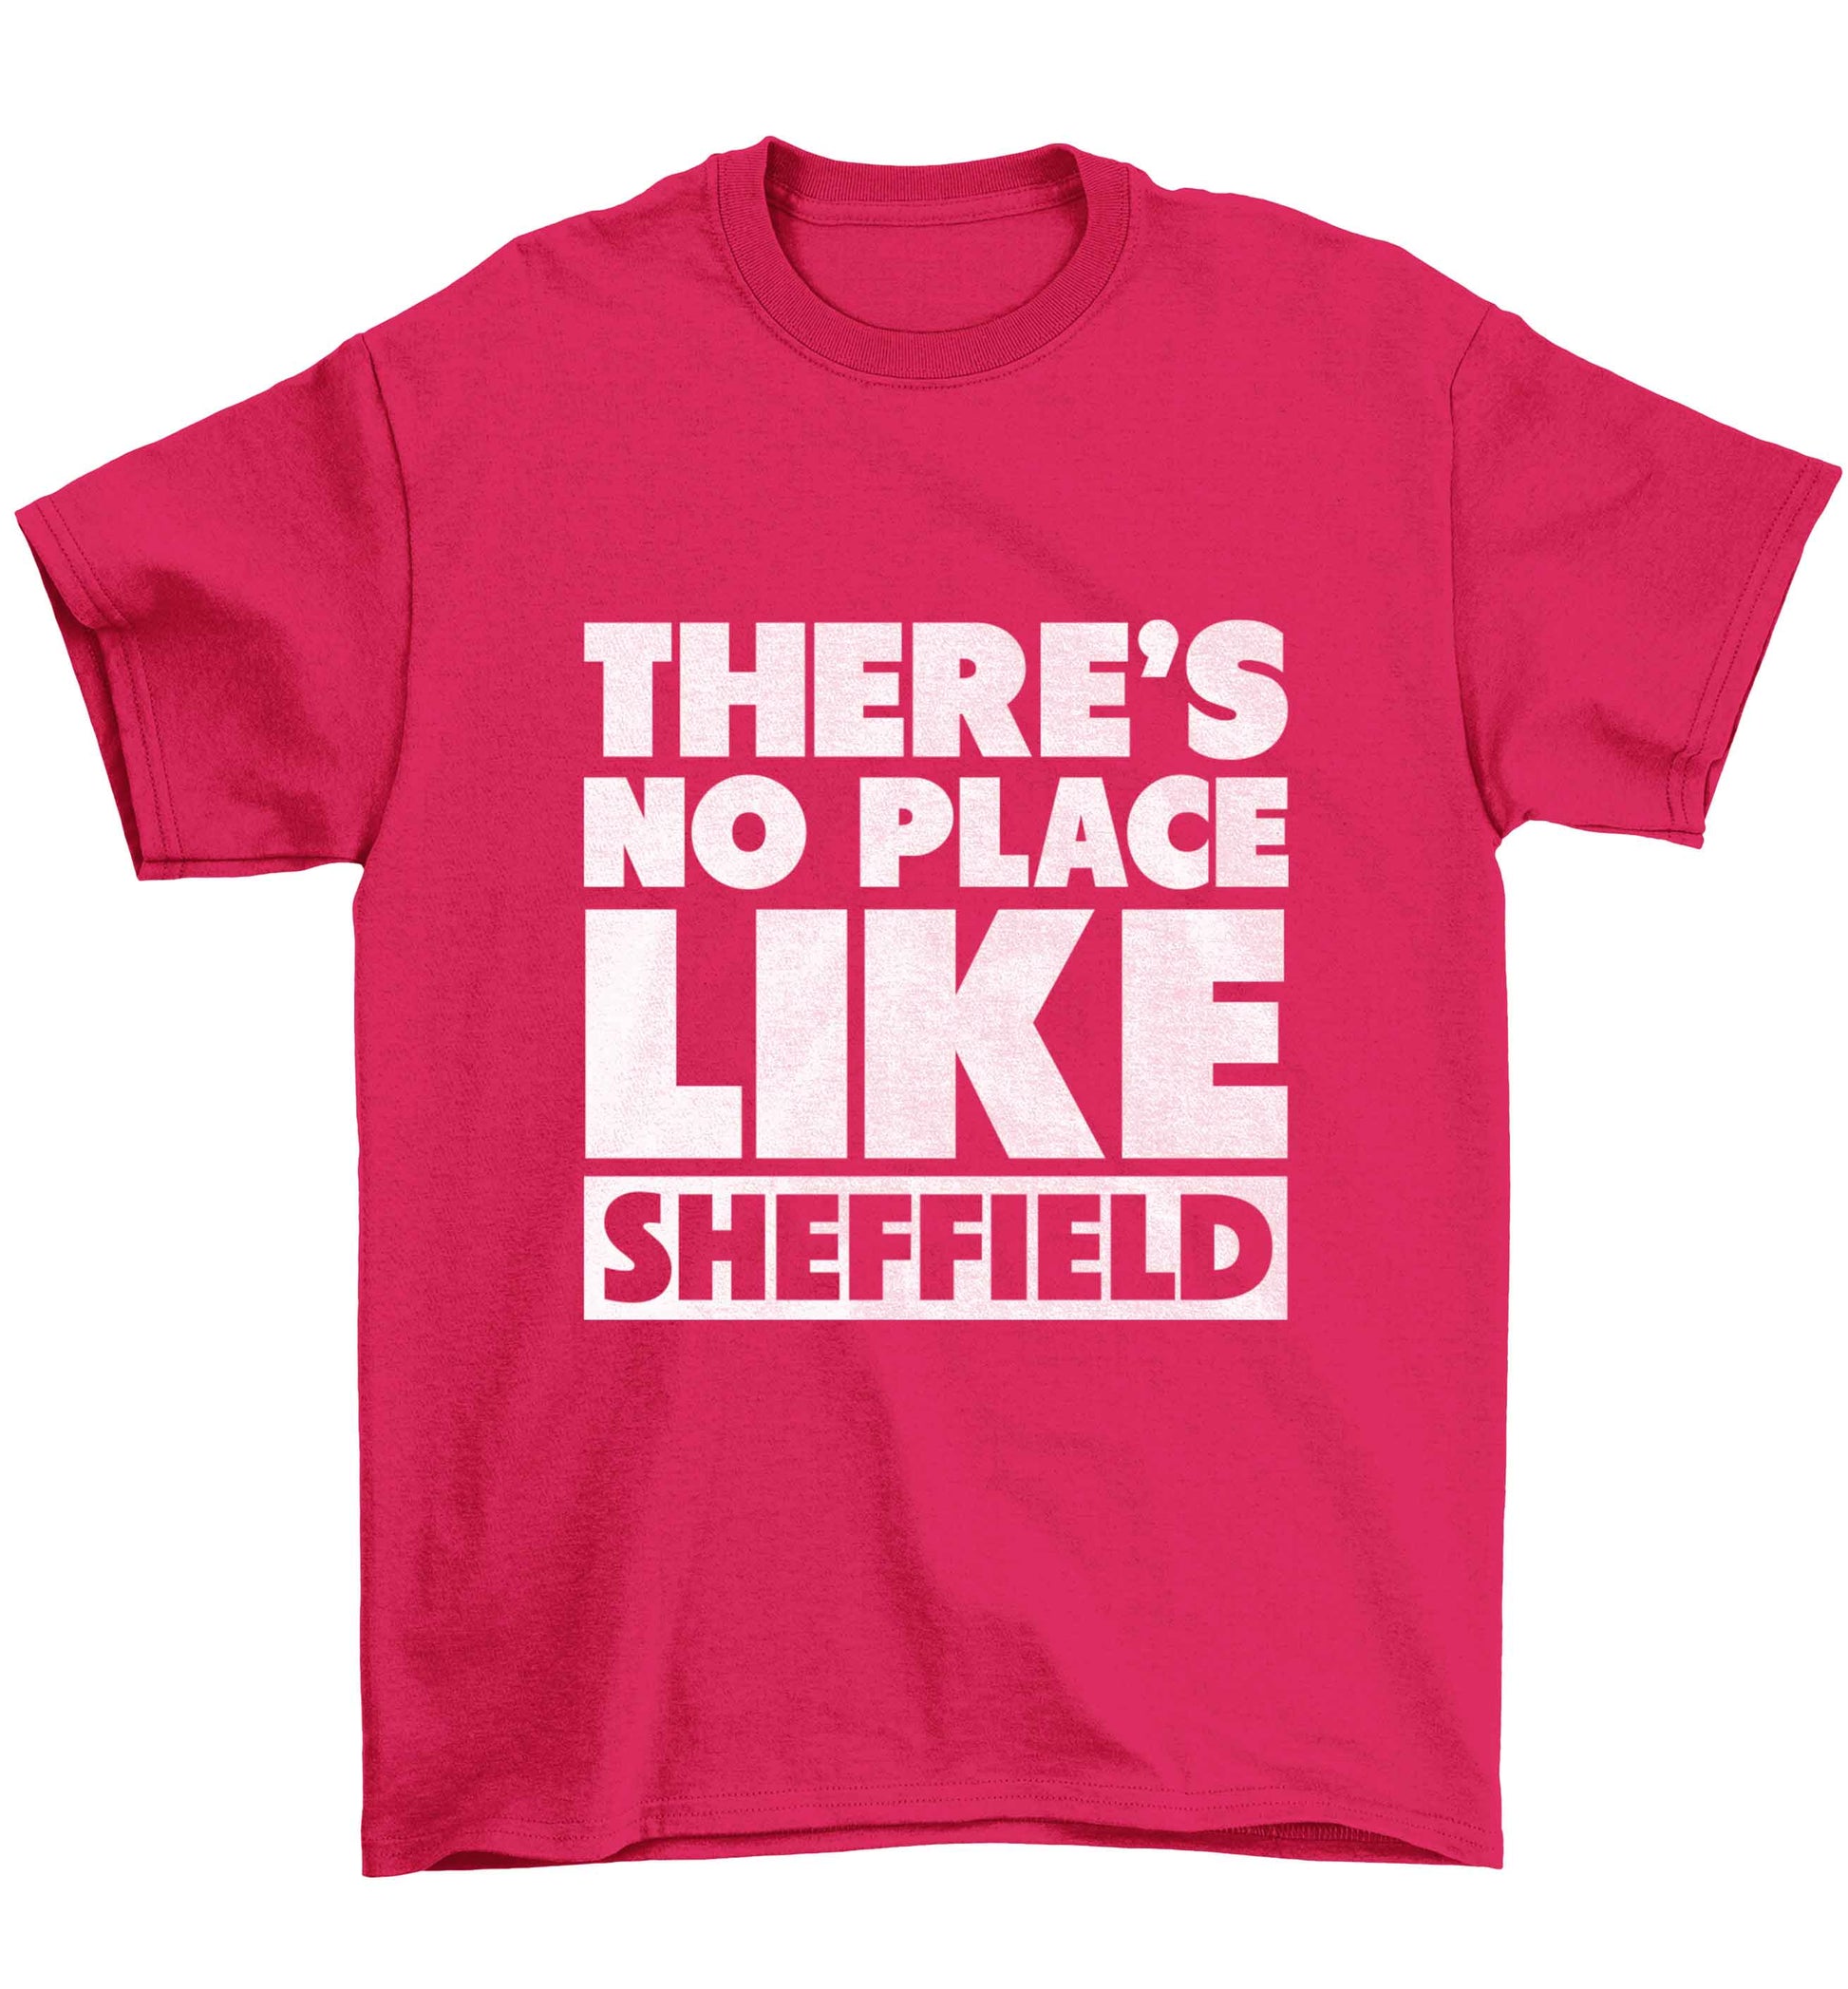 There's no place like Sheffield Children's pink Tshirt 12-13 Years